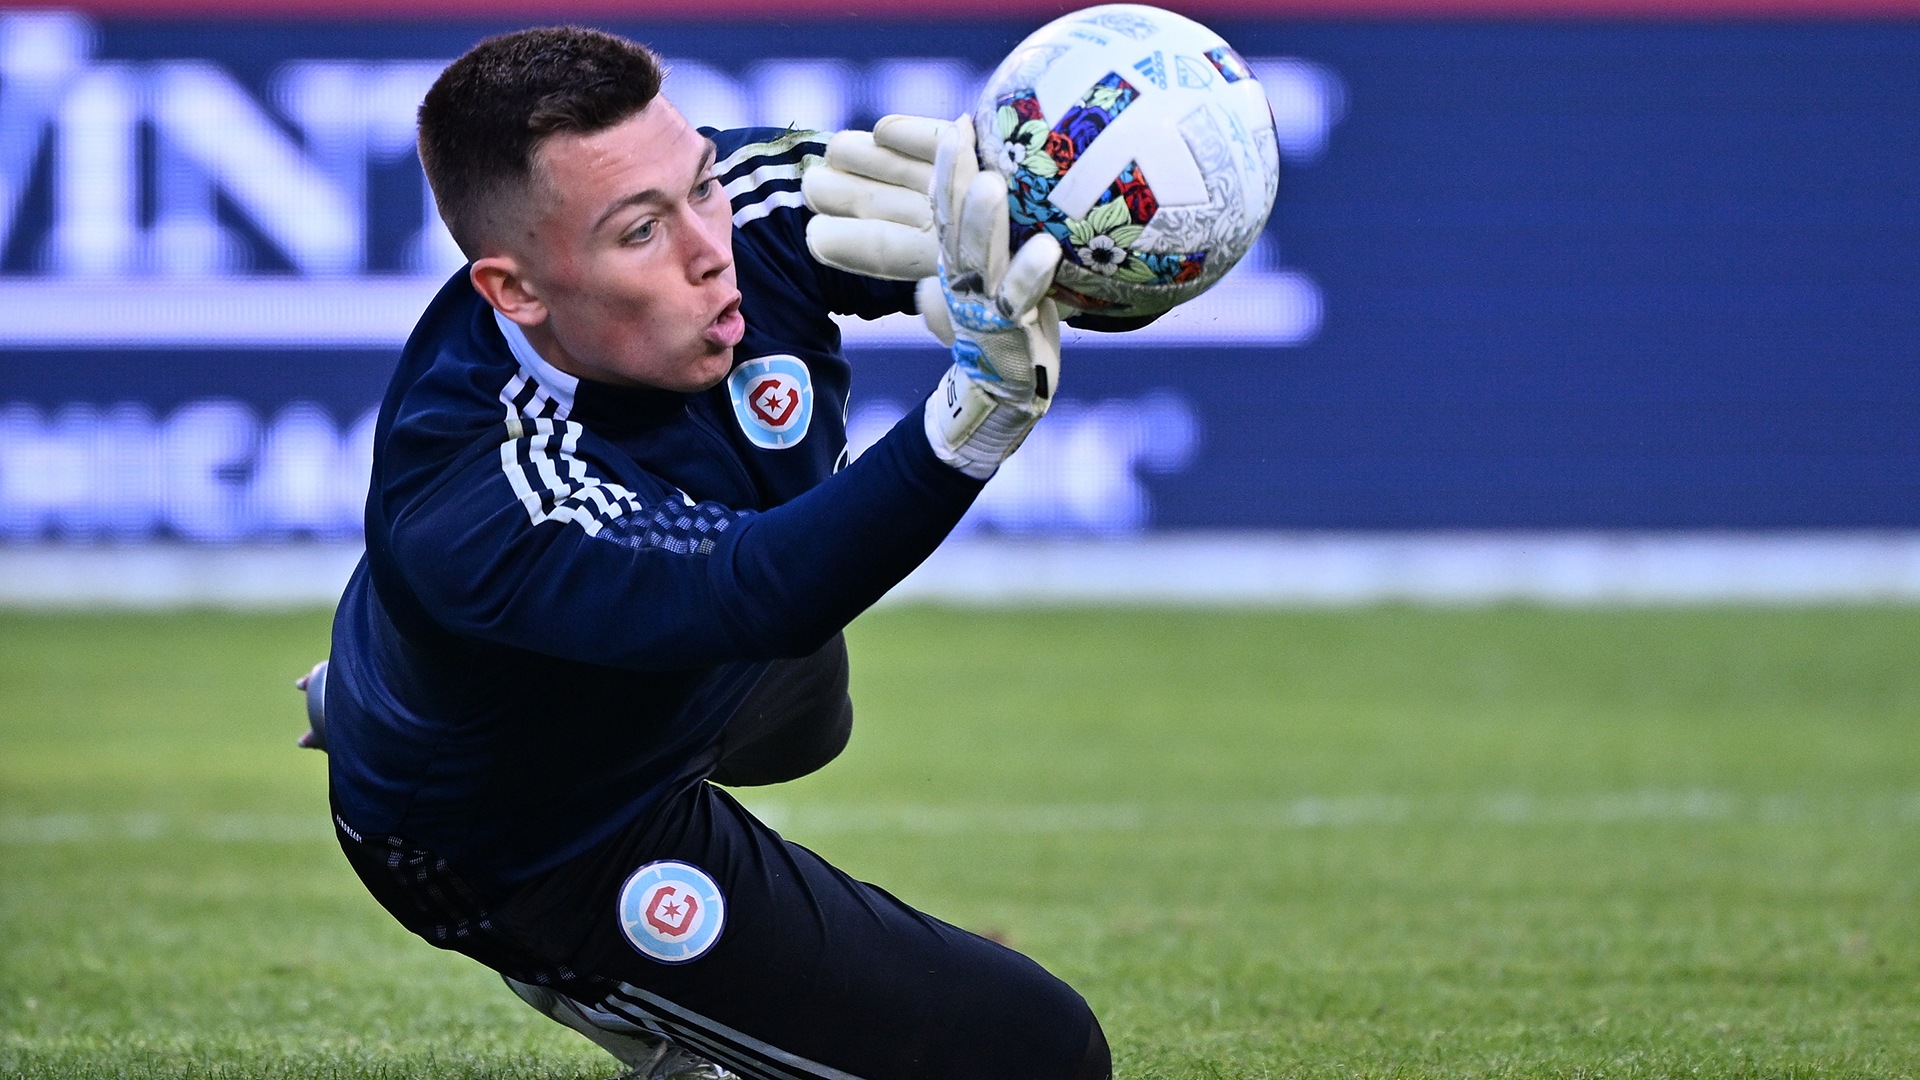 Chicago Fire FC goalkeeper Gabriel Slonina will continue playing for USMNT